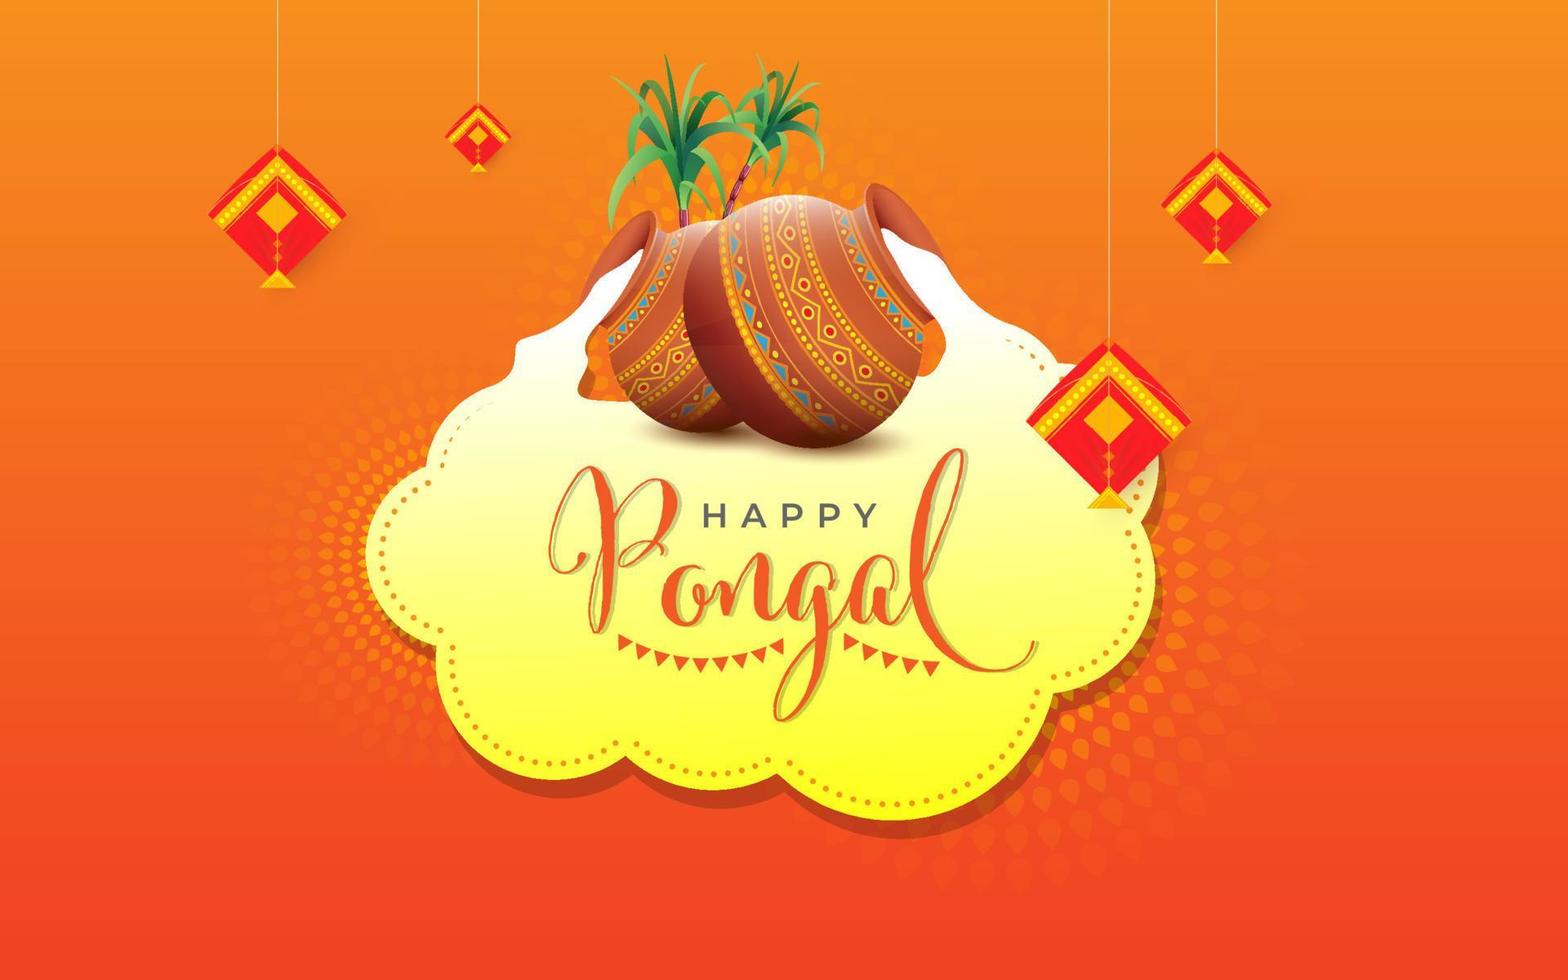 Happy Pongal Festival Background Design Template vector